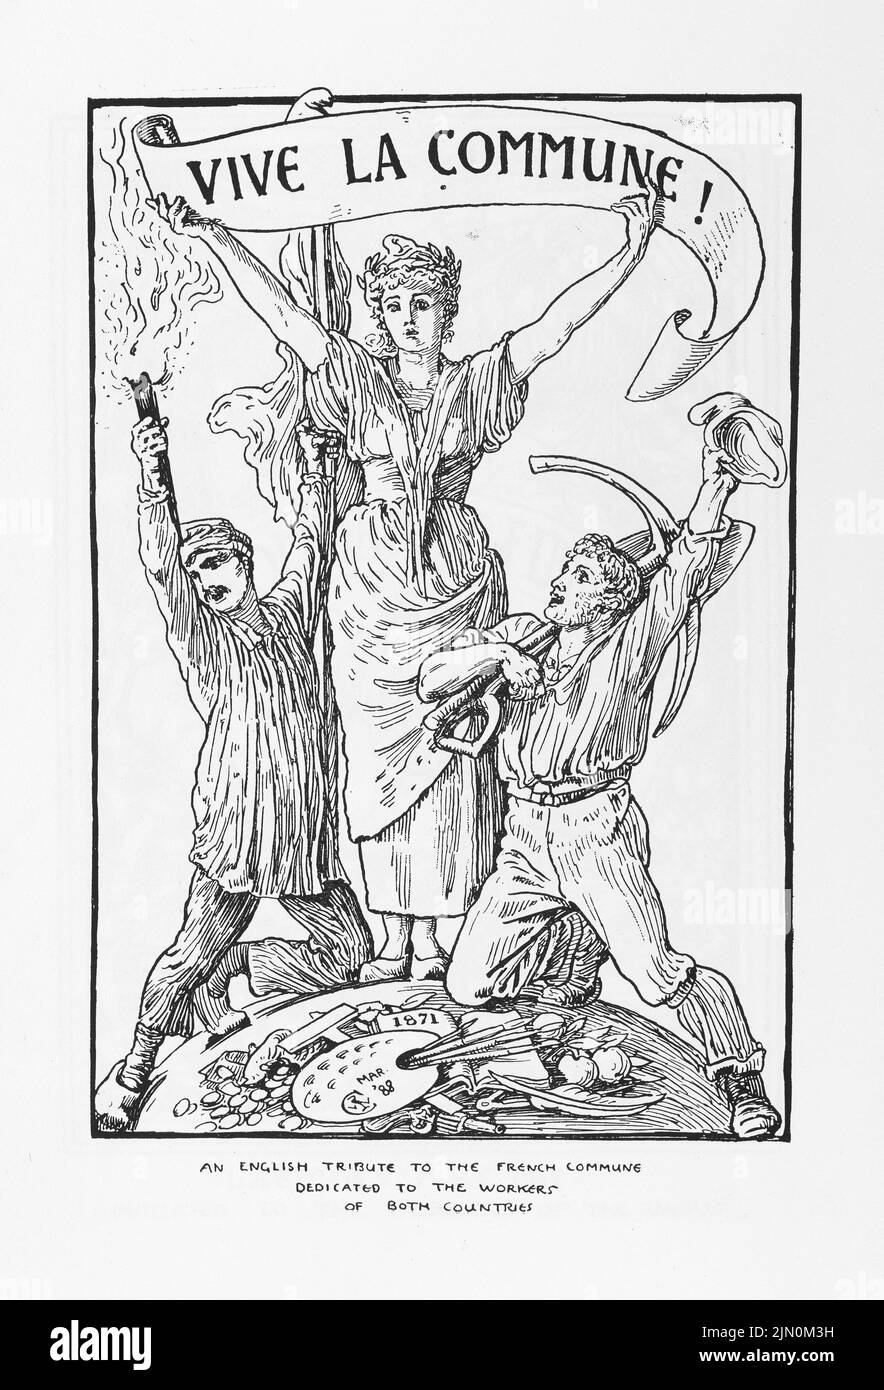 Vive La Commune! Illustration by Walter Crane from Cartoons for the Cause 1886-1896, International Socialist Workers. Stock Photo